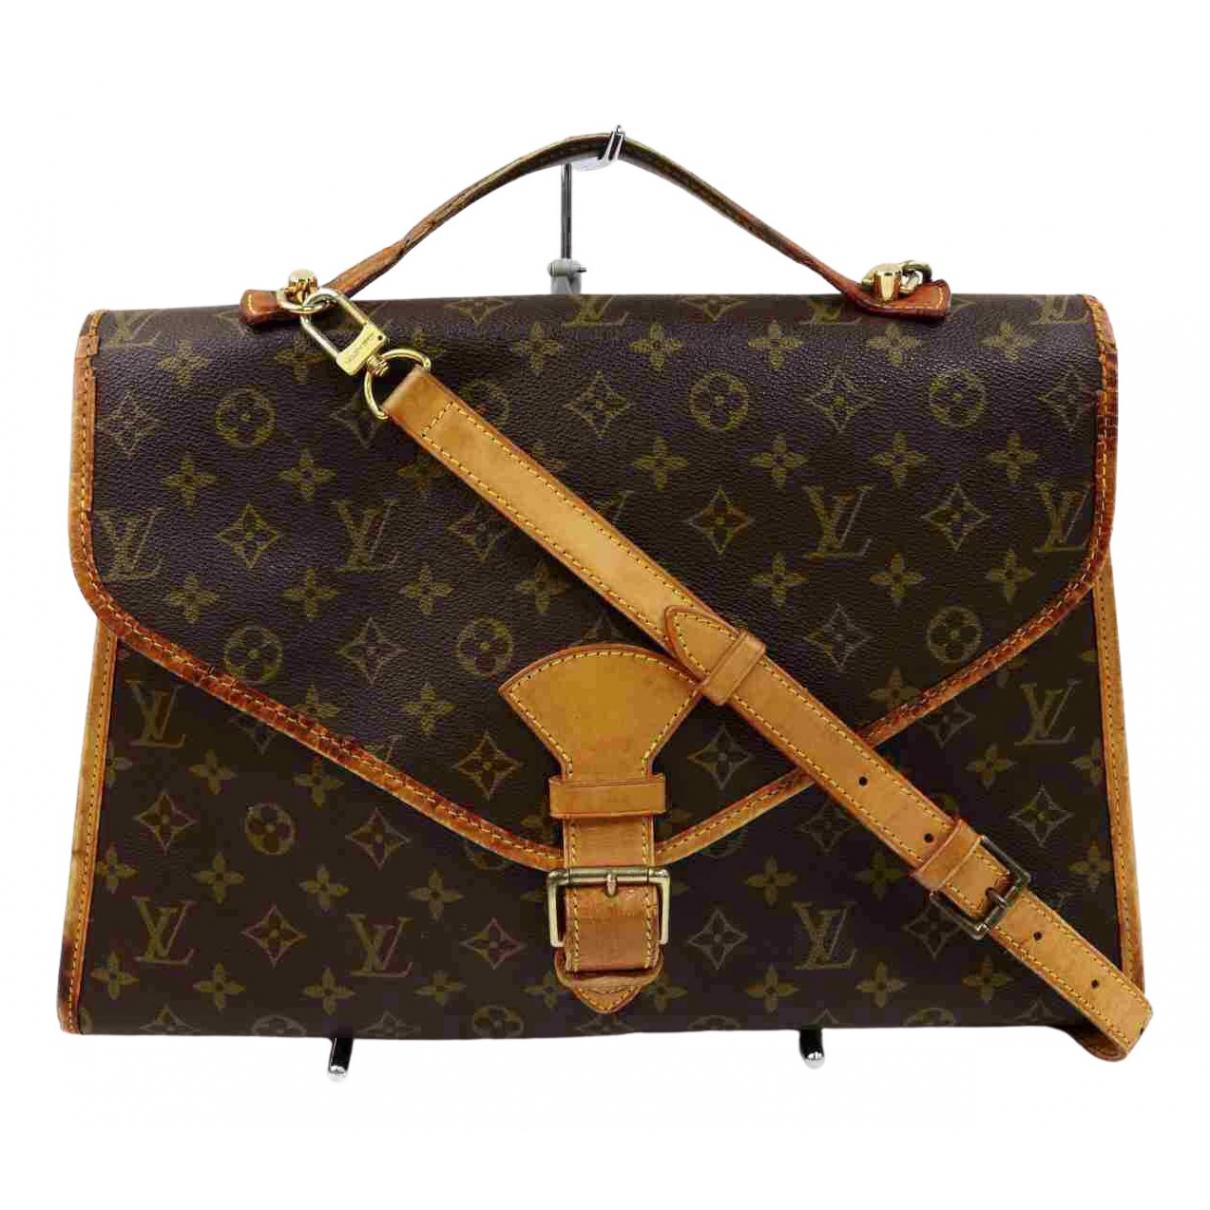 Louis Vuitton's US$39,000 airplane bag goes viral as designers